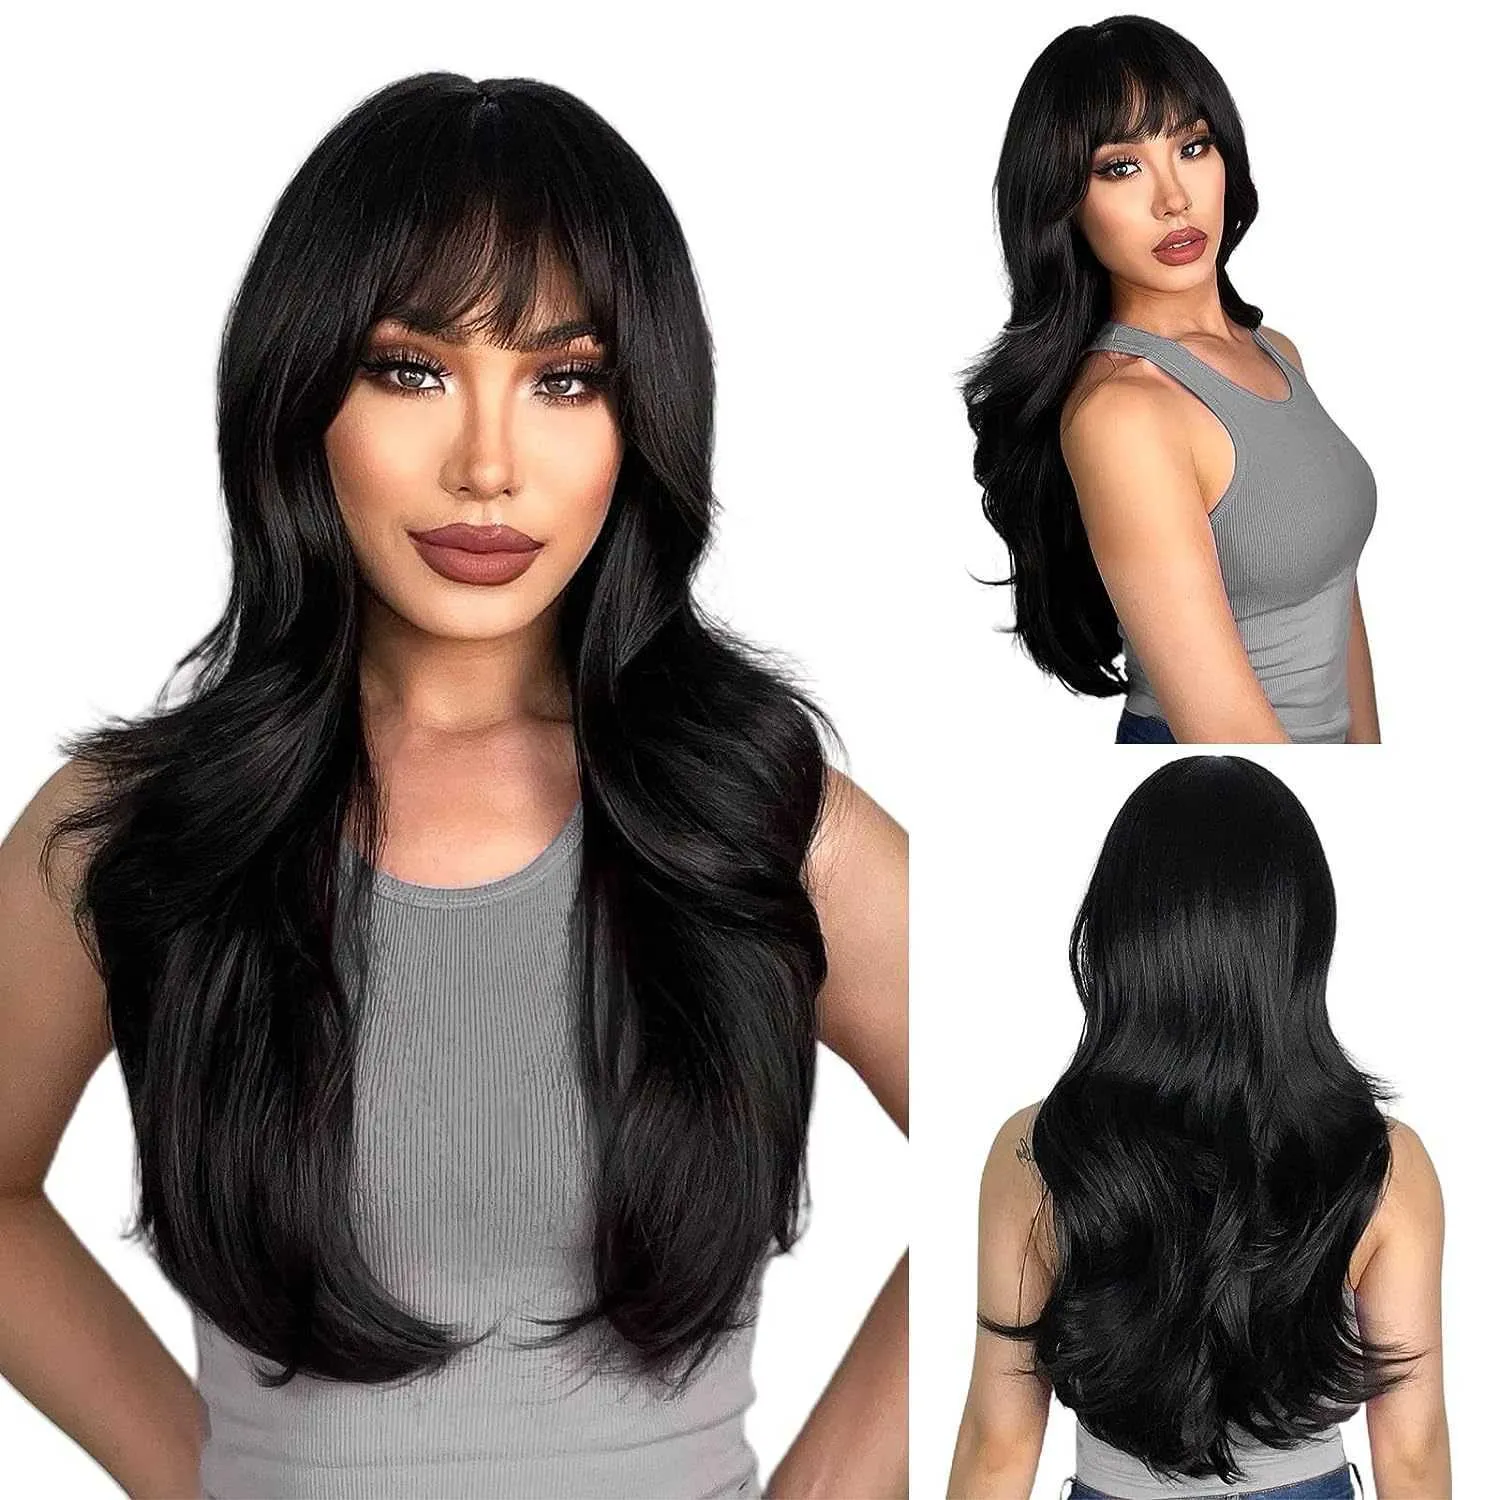 Synthetic Wigs Wig Women's Fashion Chemical Fiber Head Cover Black Straight bangs Long curly hair with large waves and multiple layers